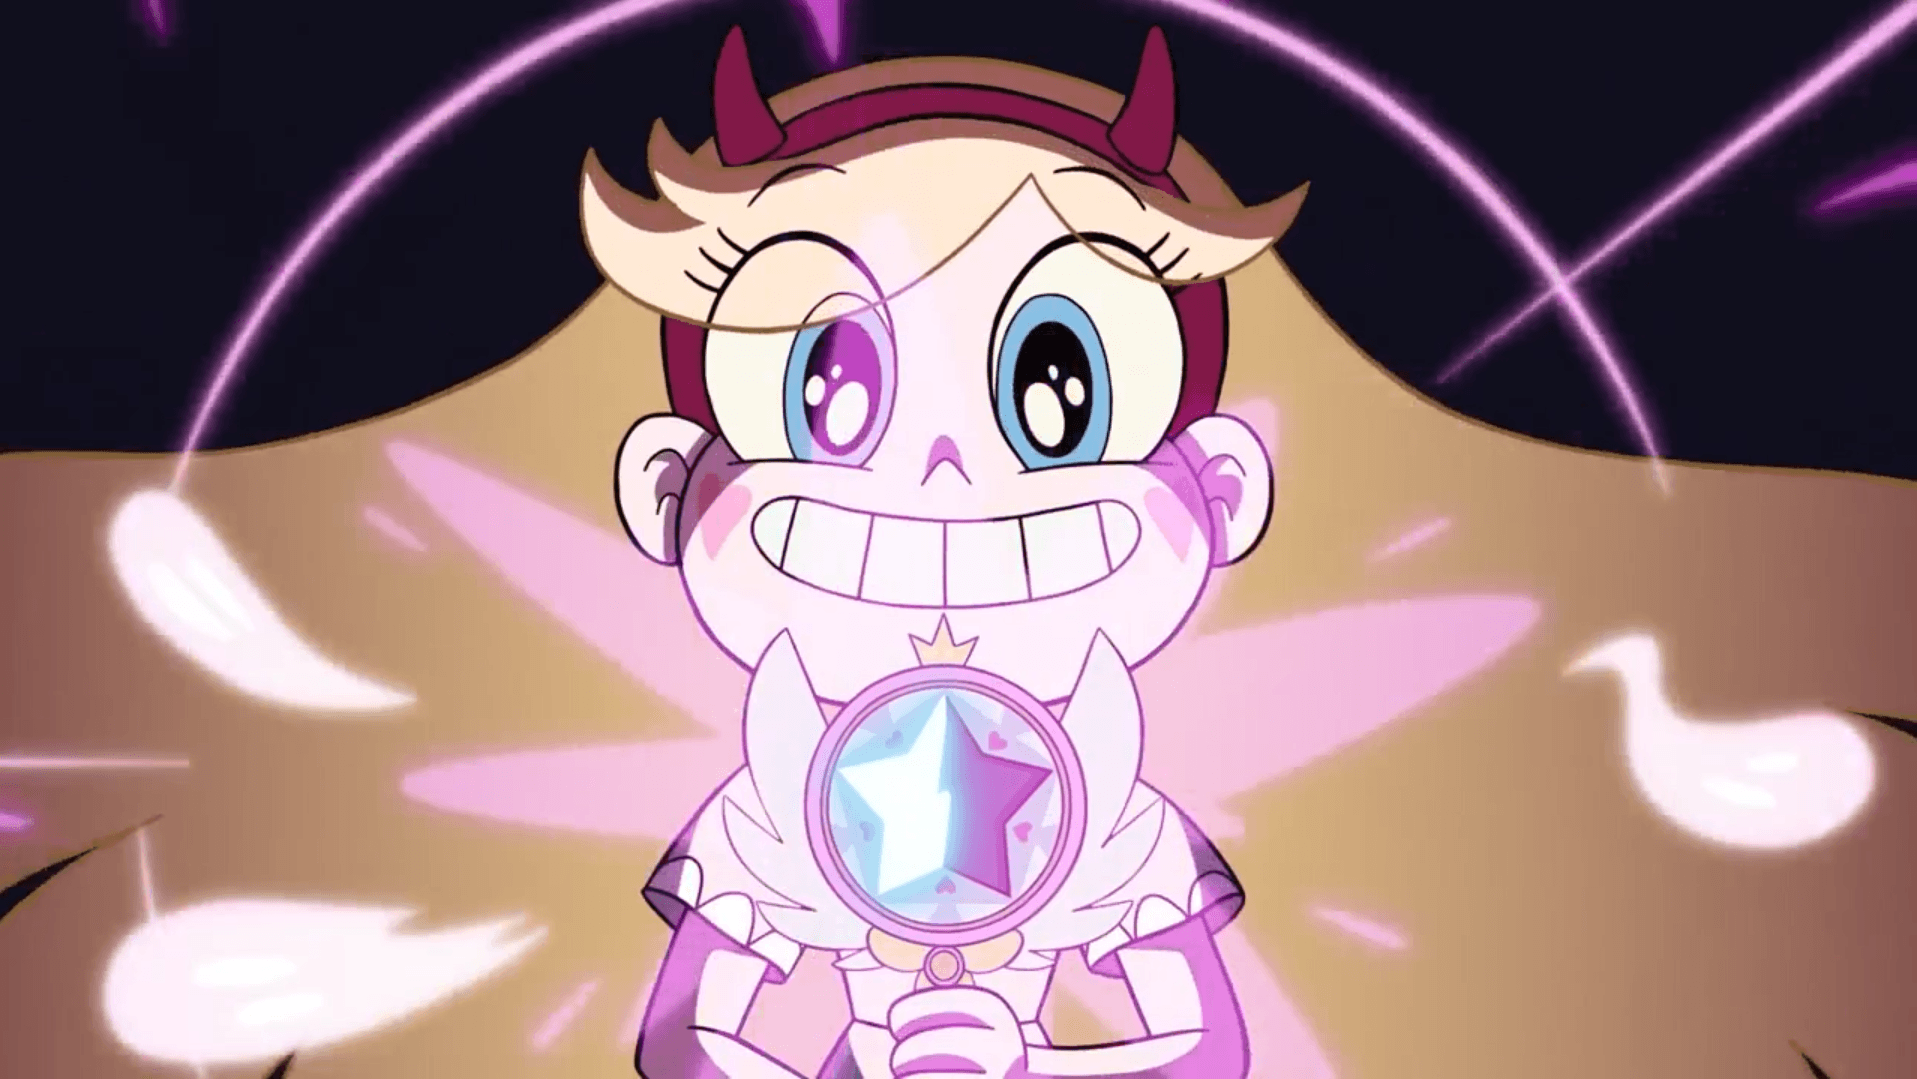 Star vs the Forces of Evil wallpapers.